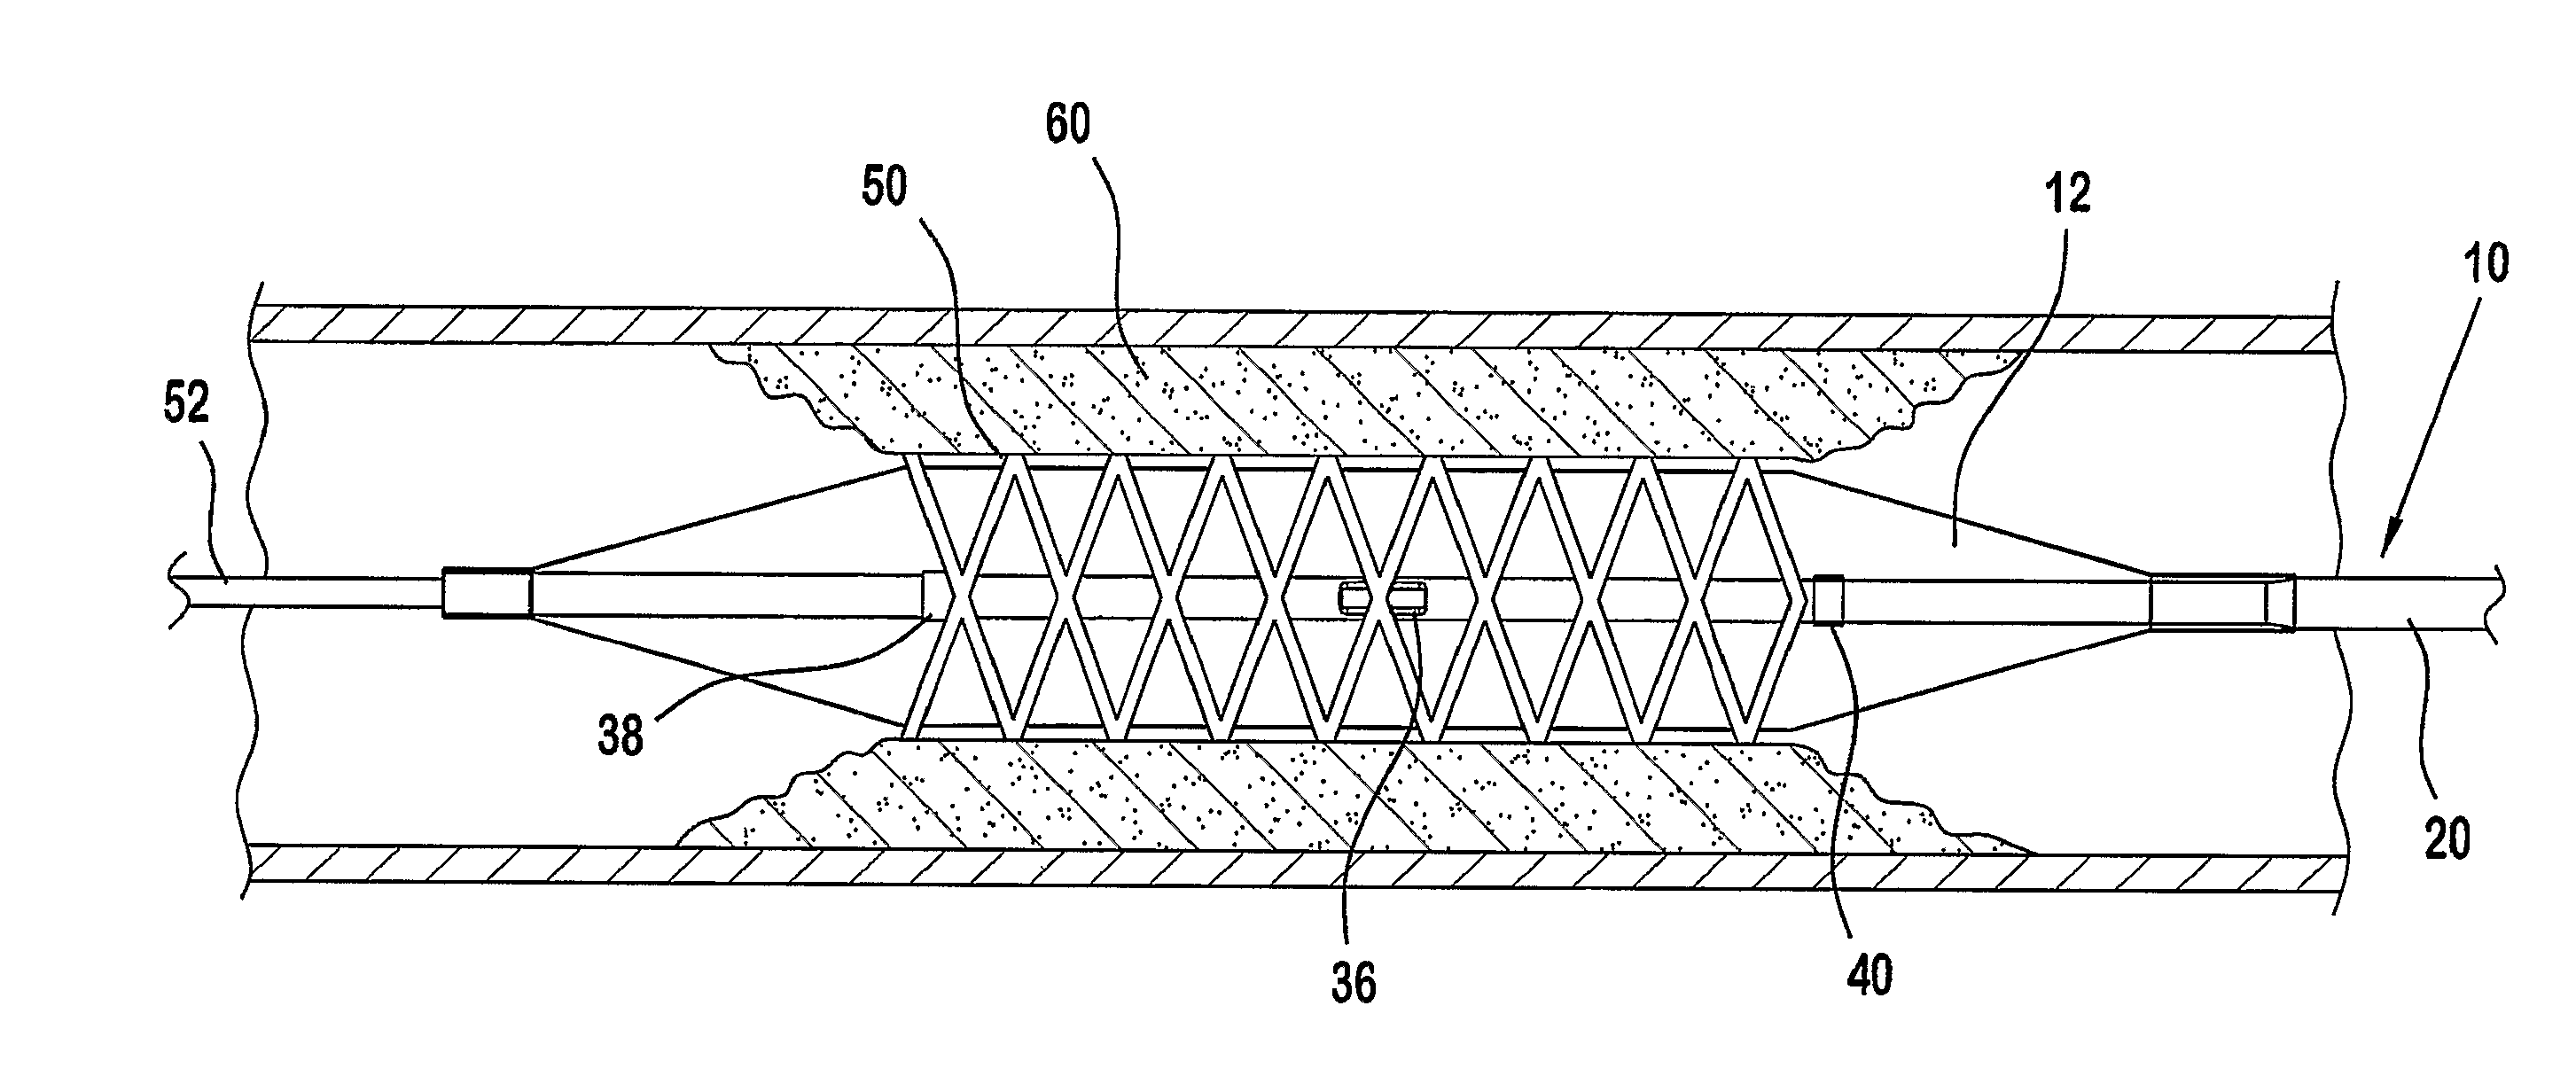 Balloon catheter with centralized vent hole